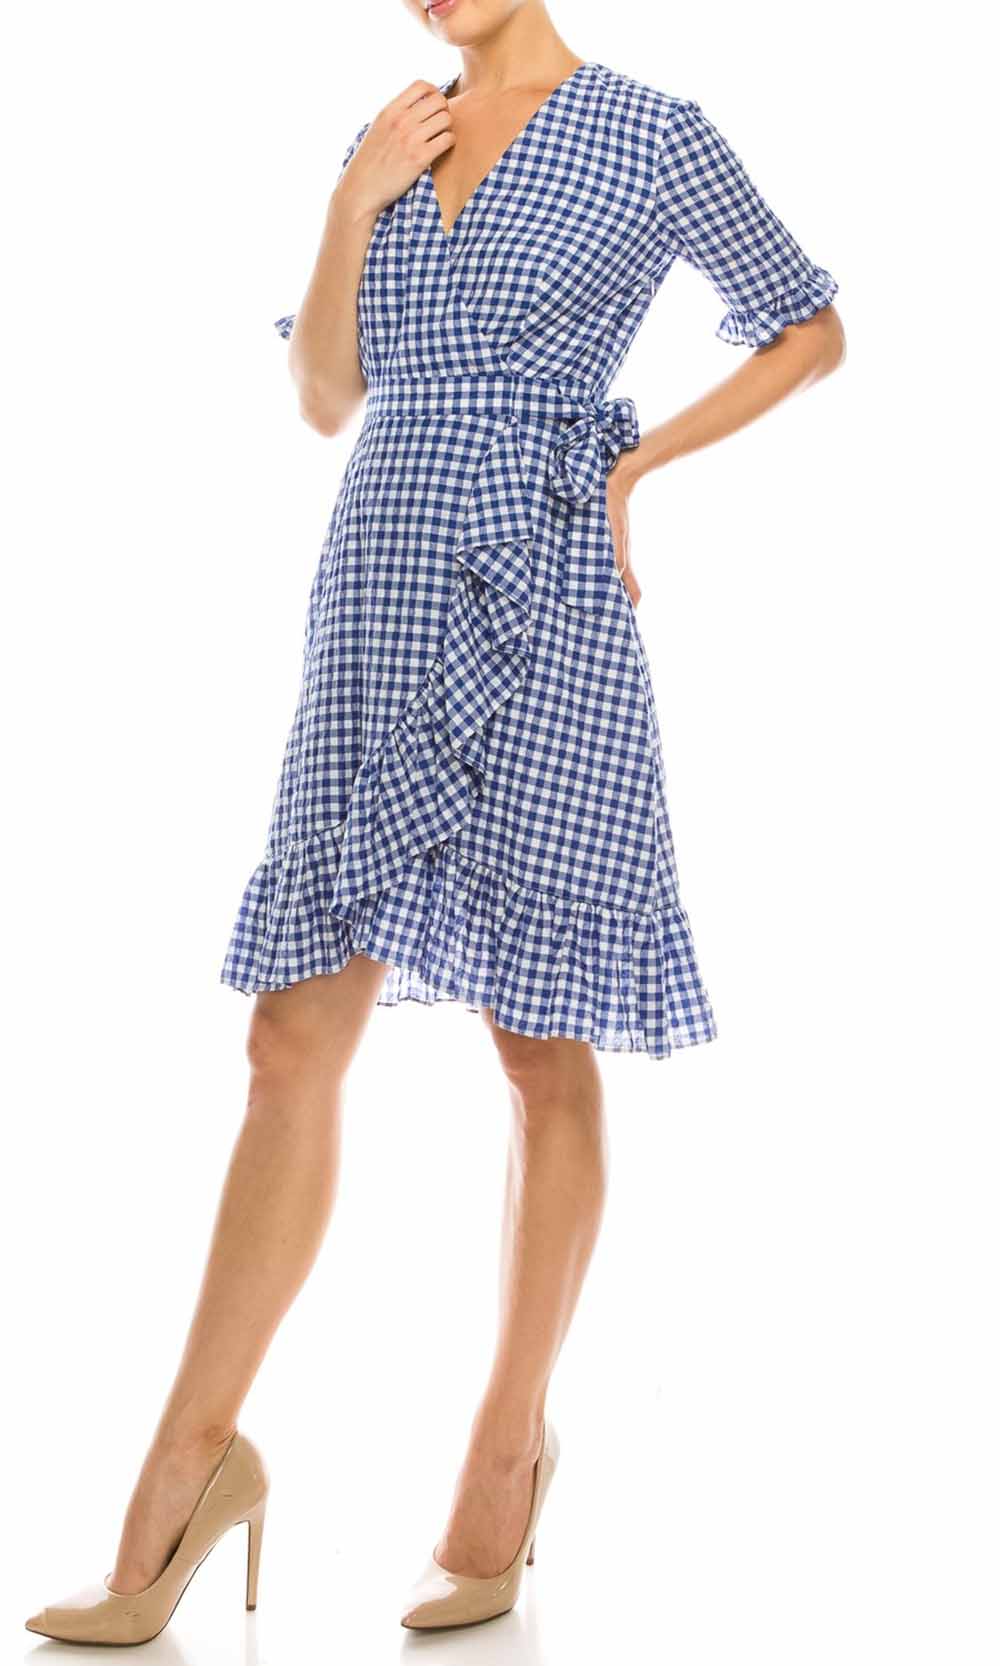 Maggy London - G3958M Gingham Print Ruffle Trimmed Dress In Blue and Print